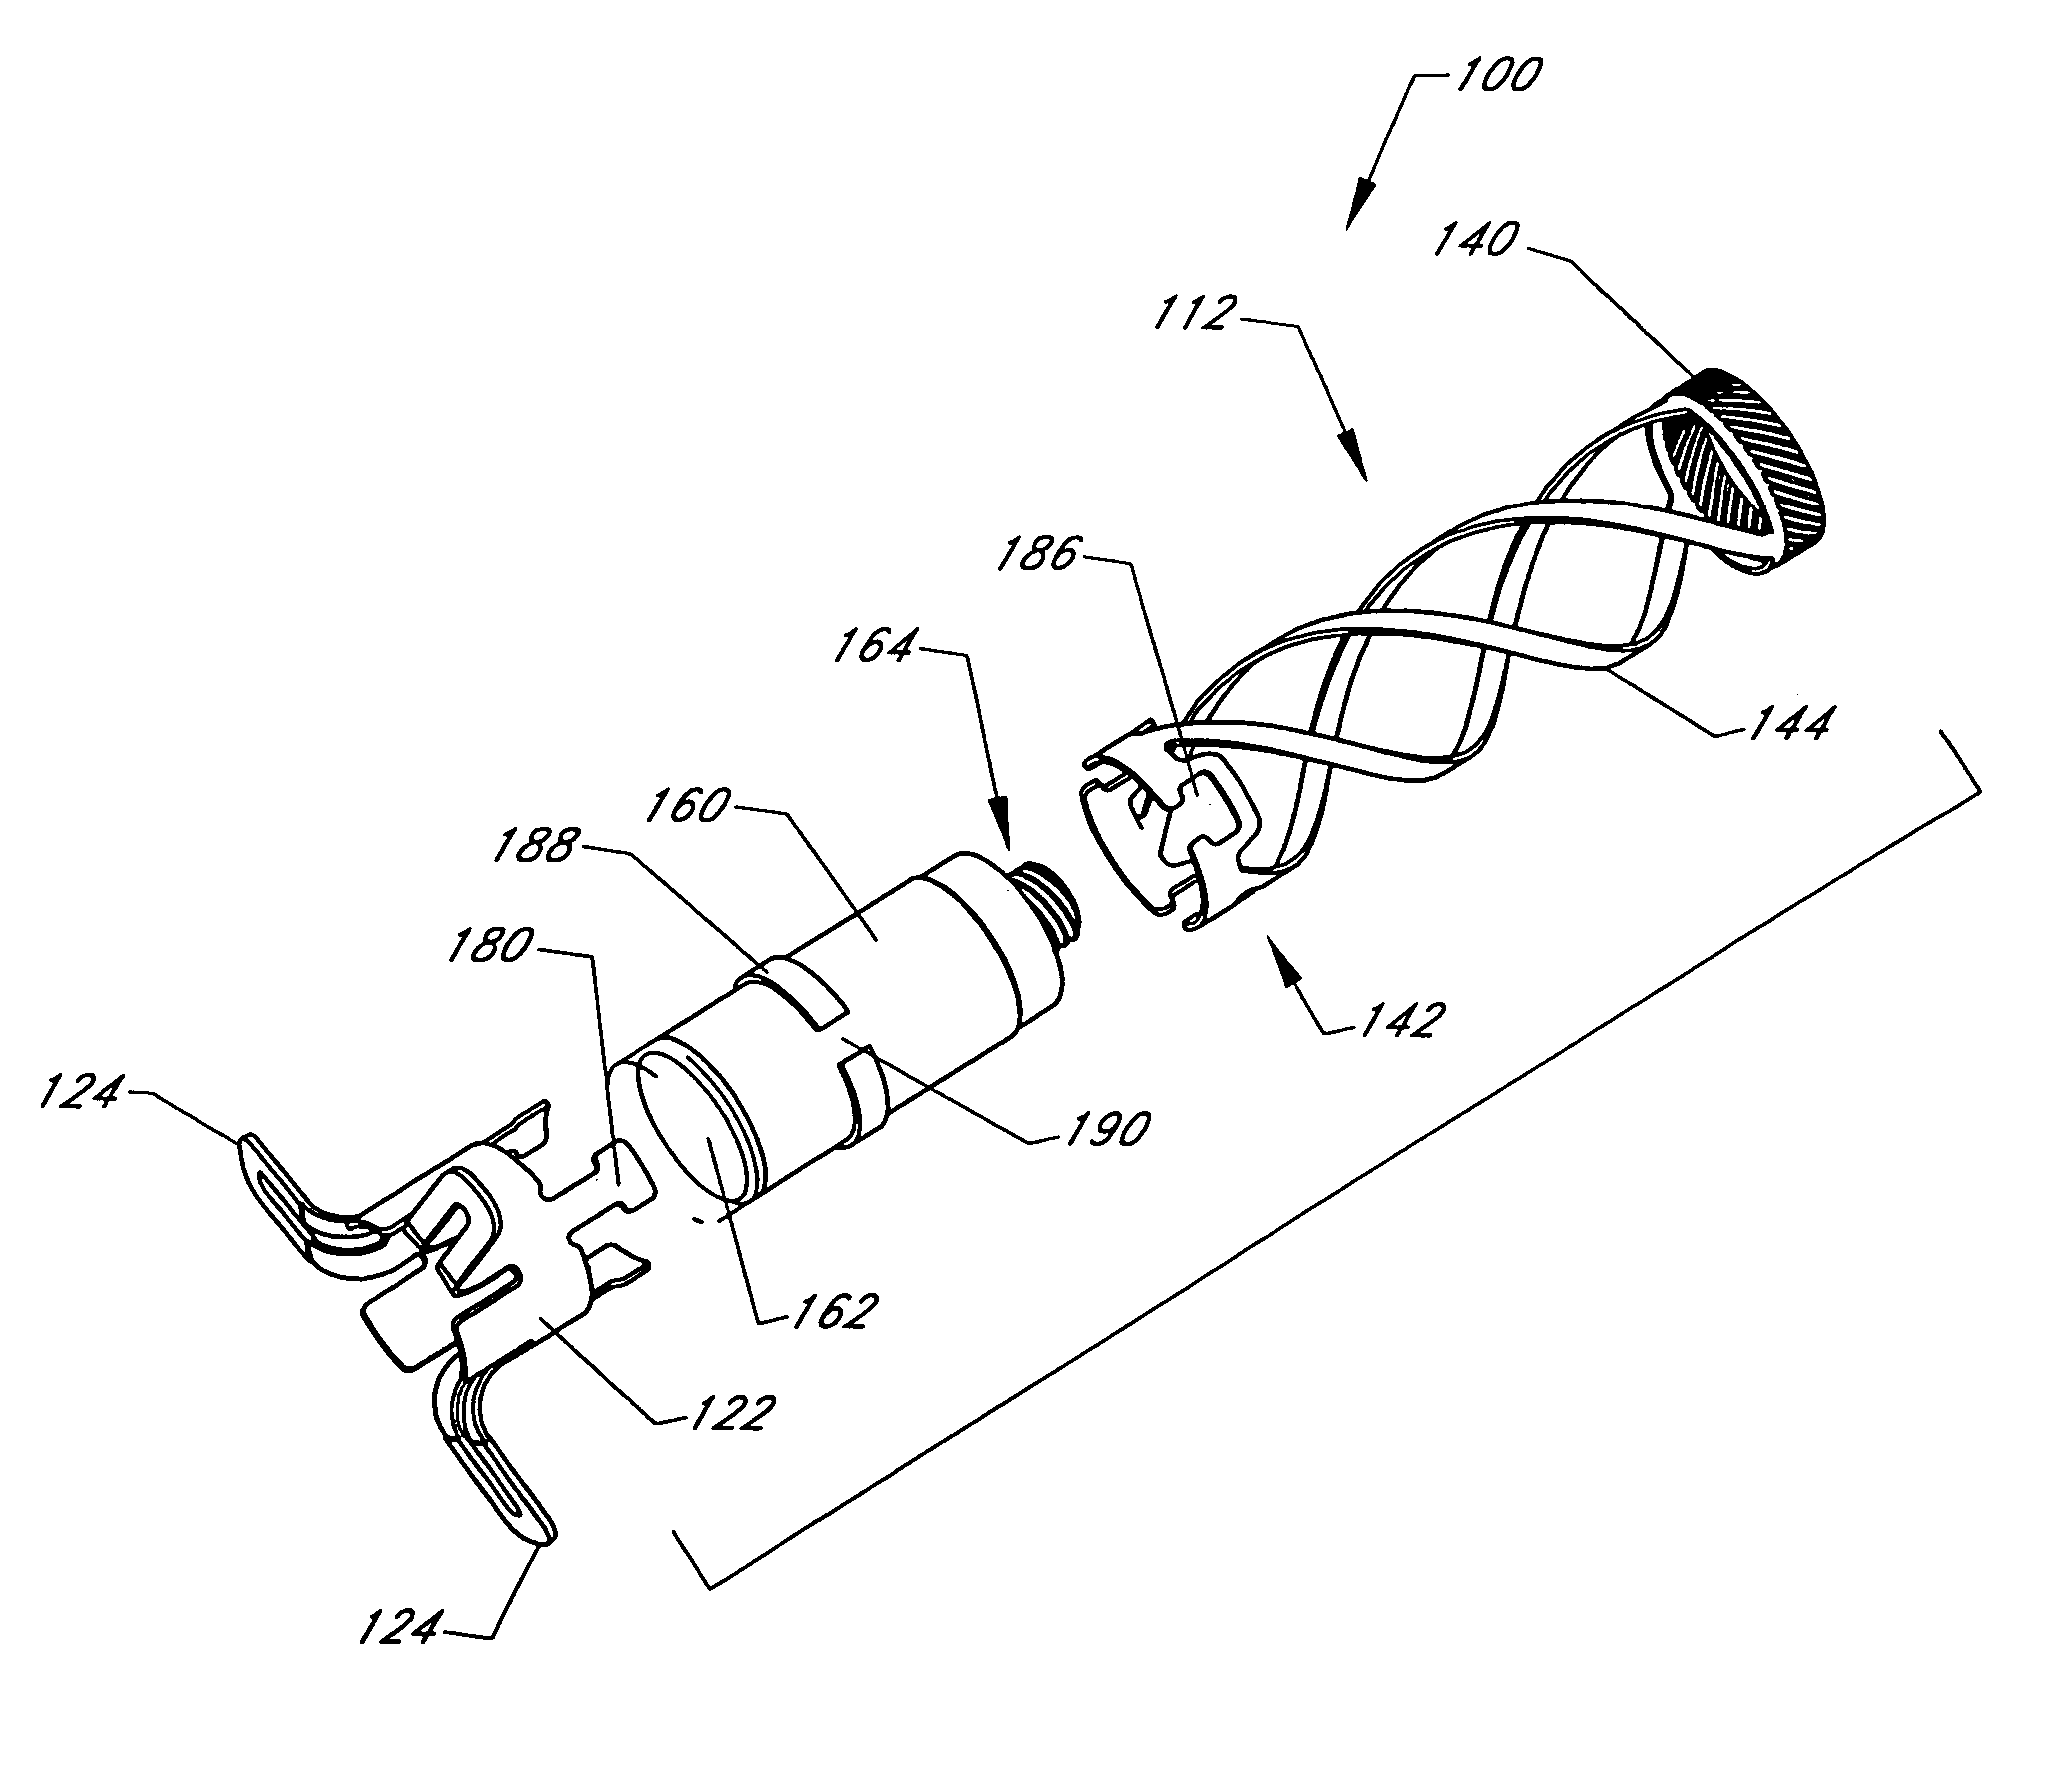 Cardiovascular anchoring device and method of deploying same